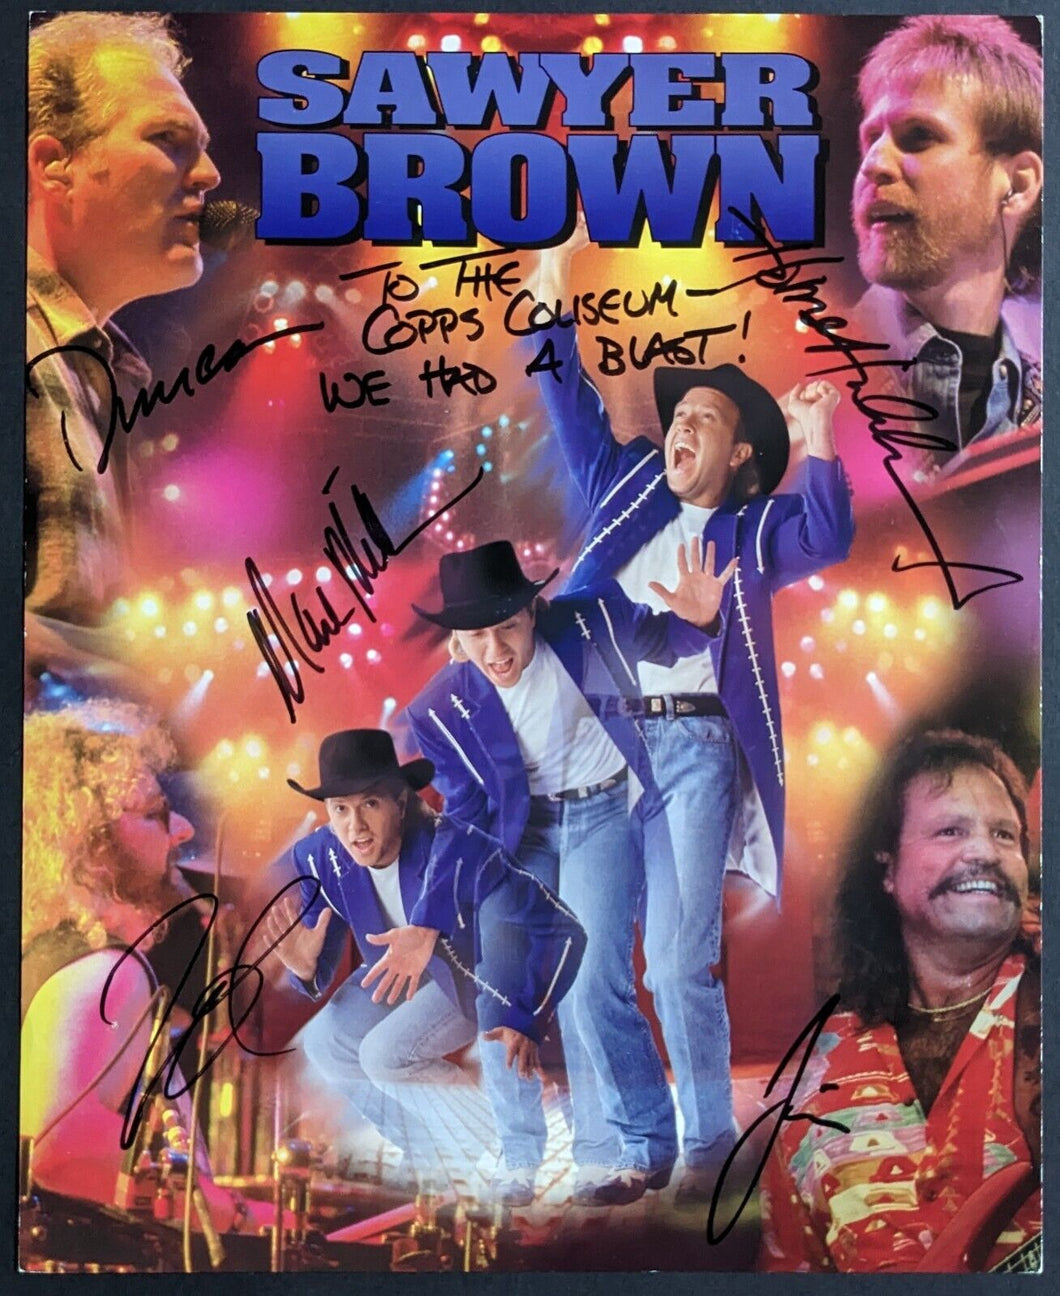 Sawyer Brown Autographed x5 Promo Photo Signed Country Band Copps Coliseum